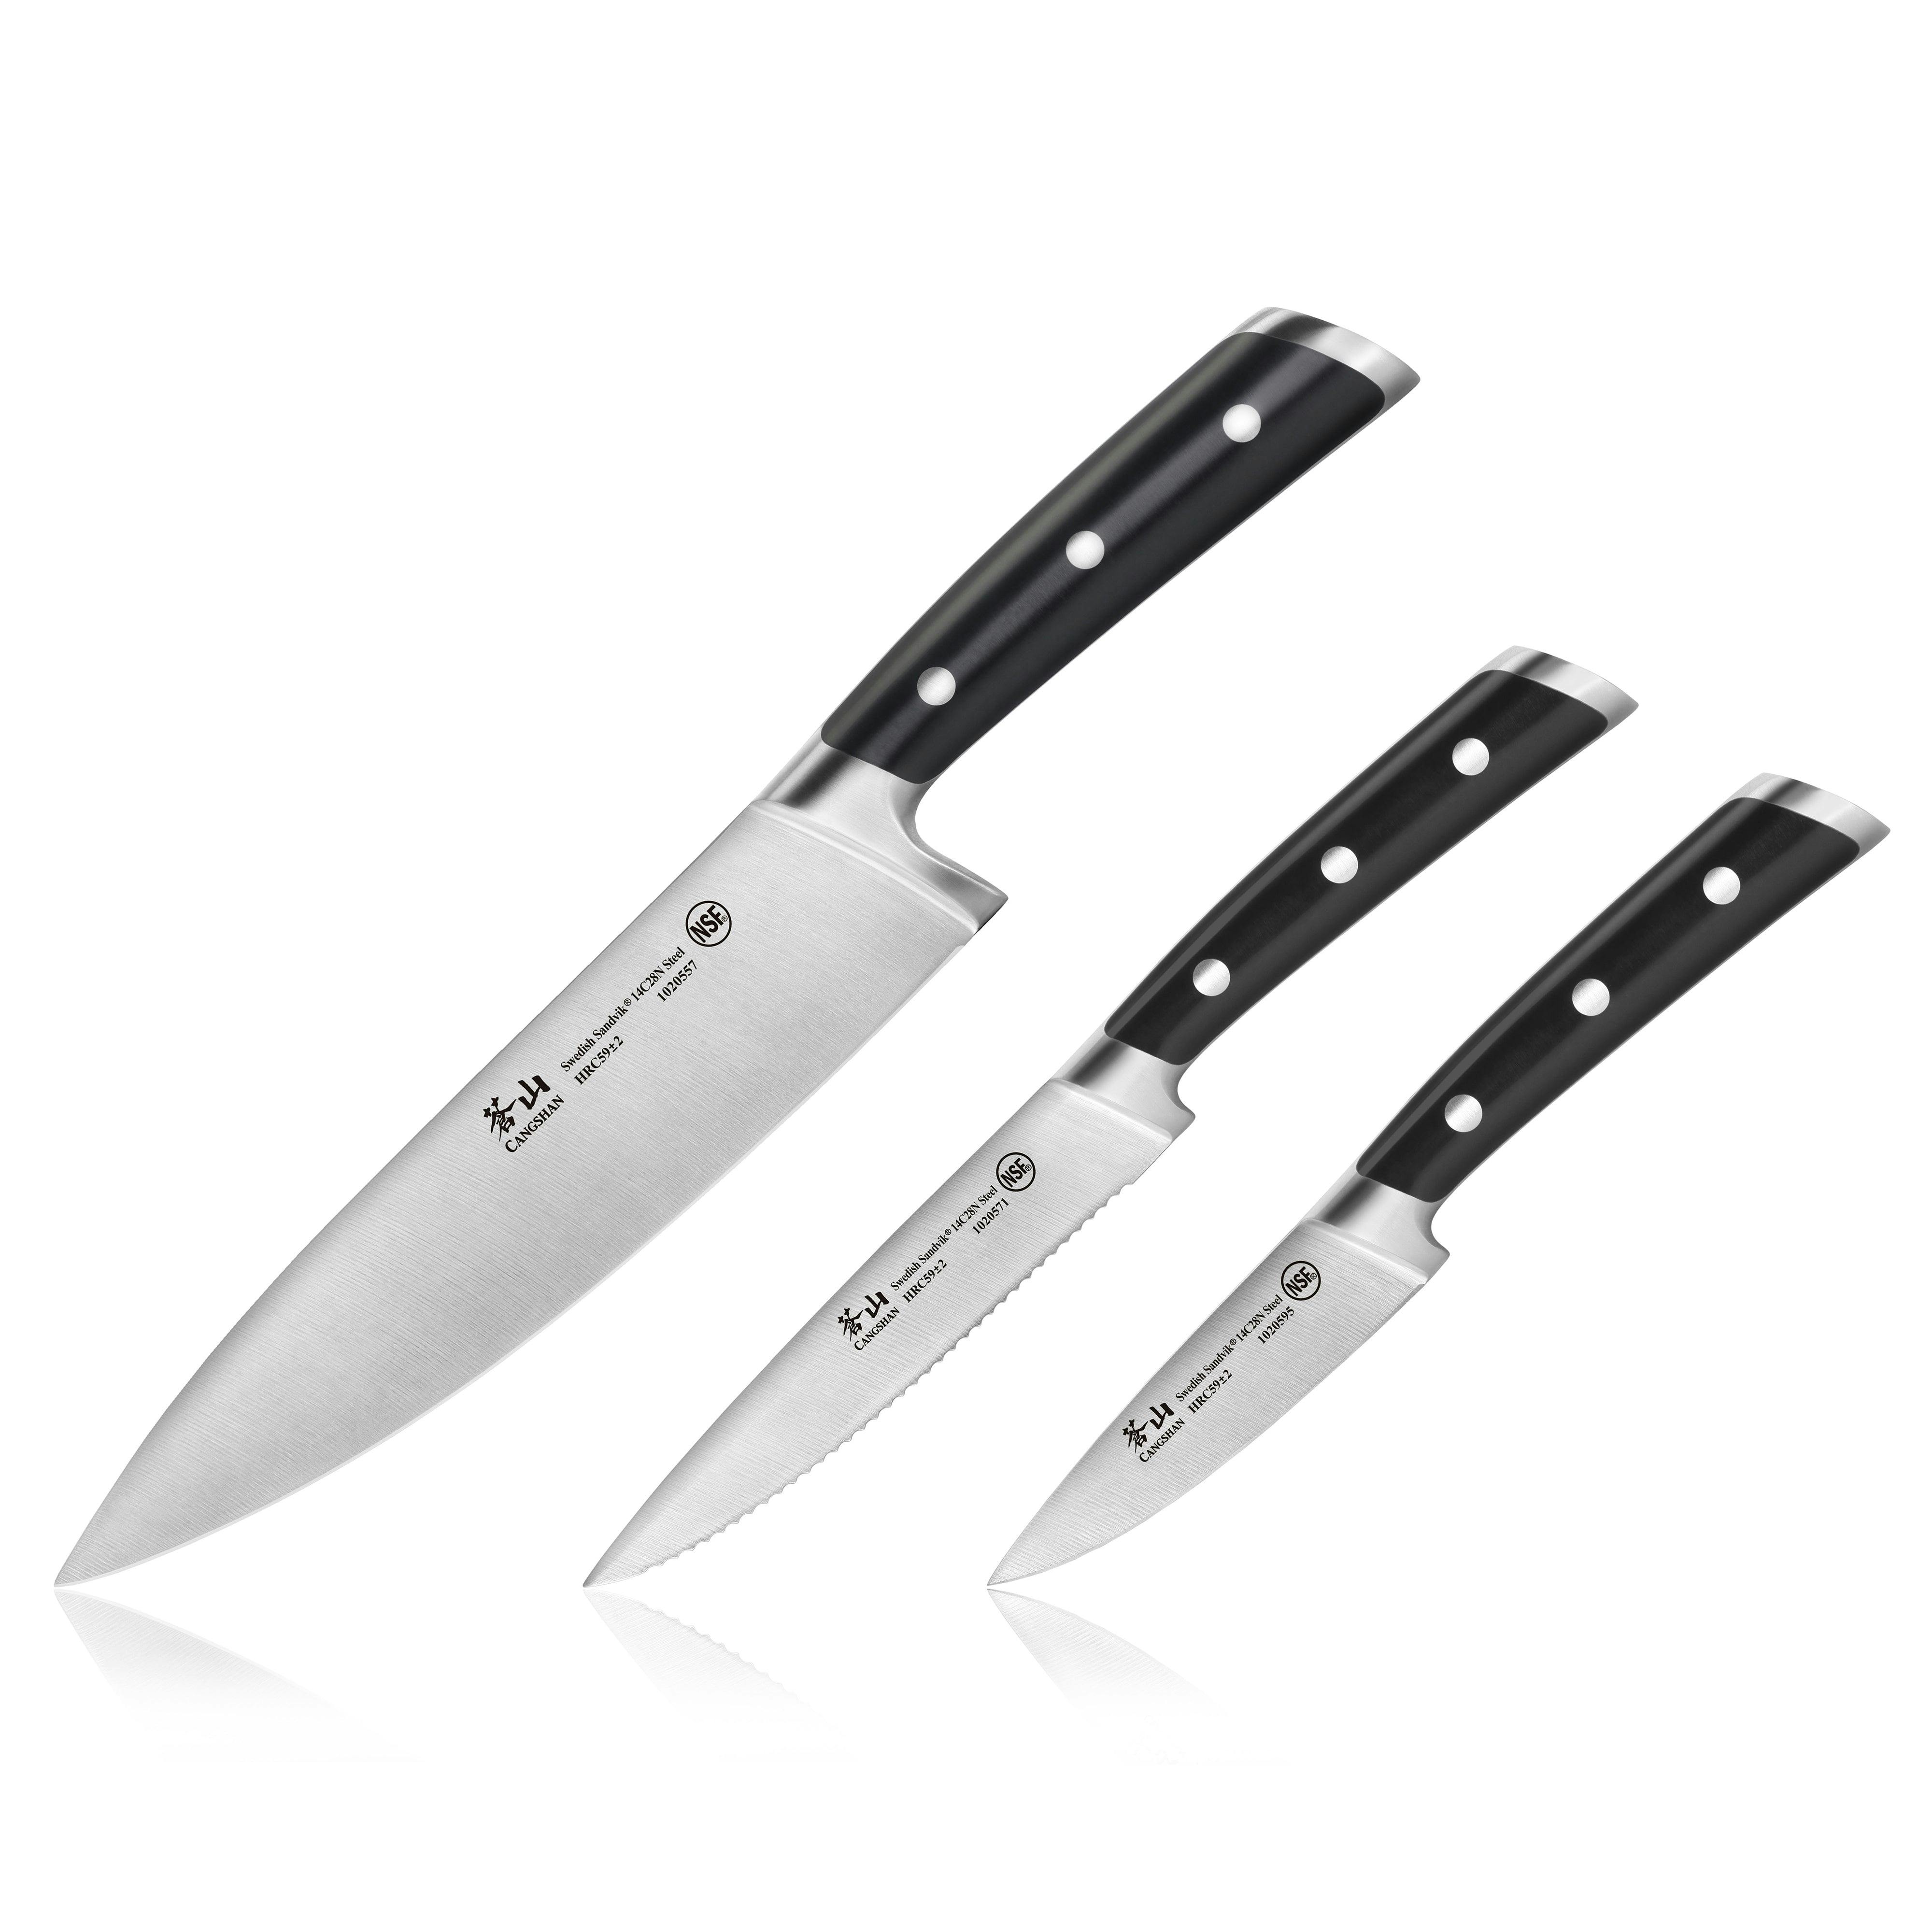 Inside Deals: Save Up to 64% — 5-Piece Knife Sets, HEPA Air